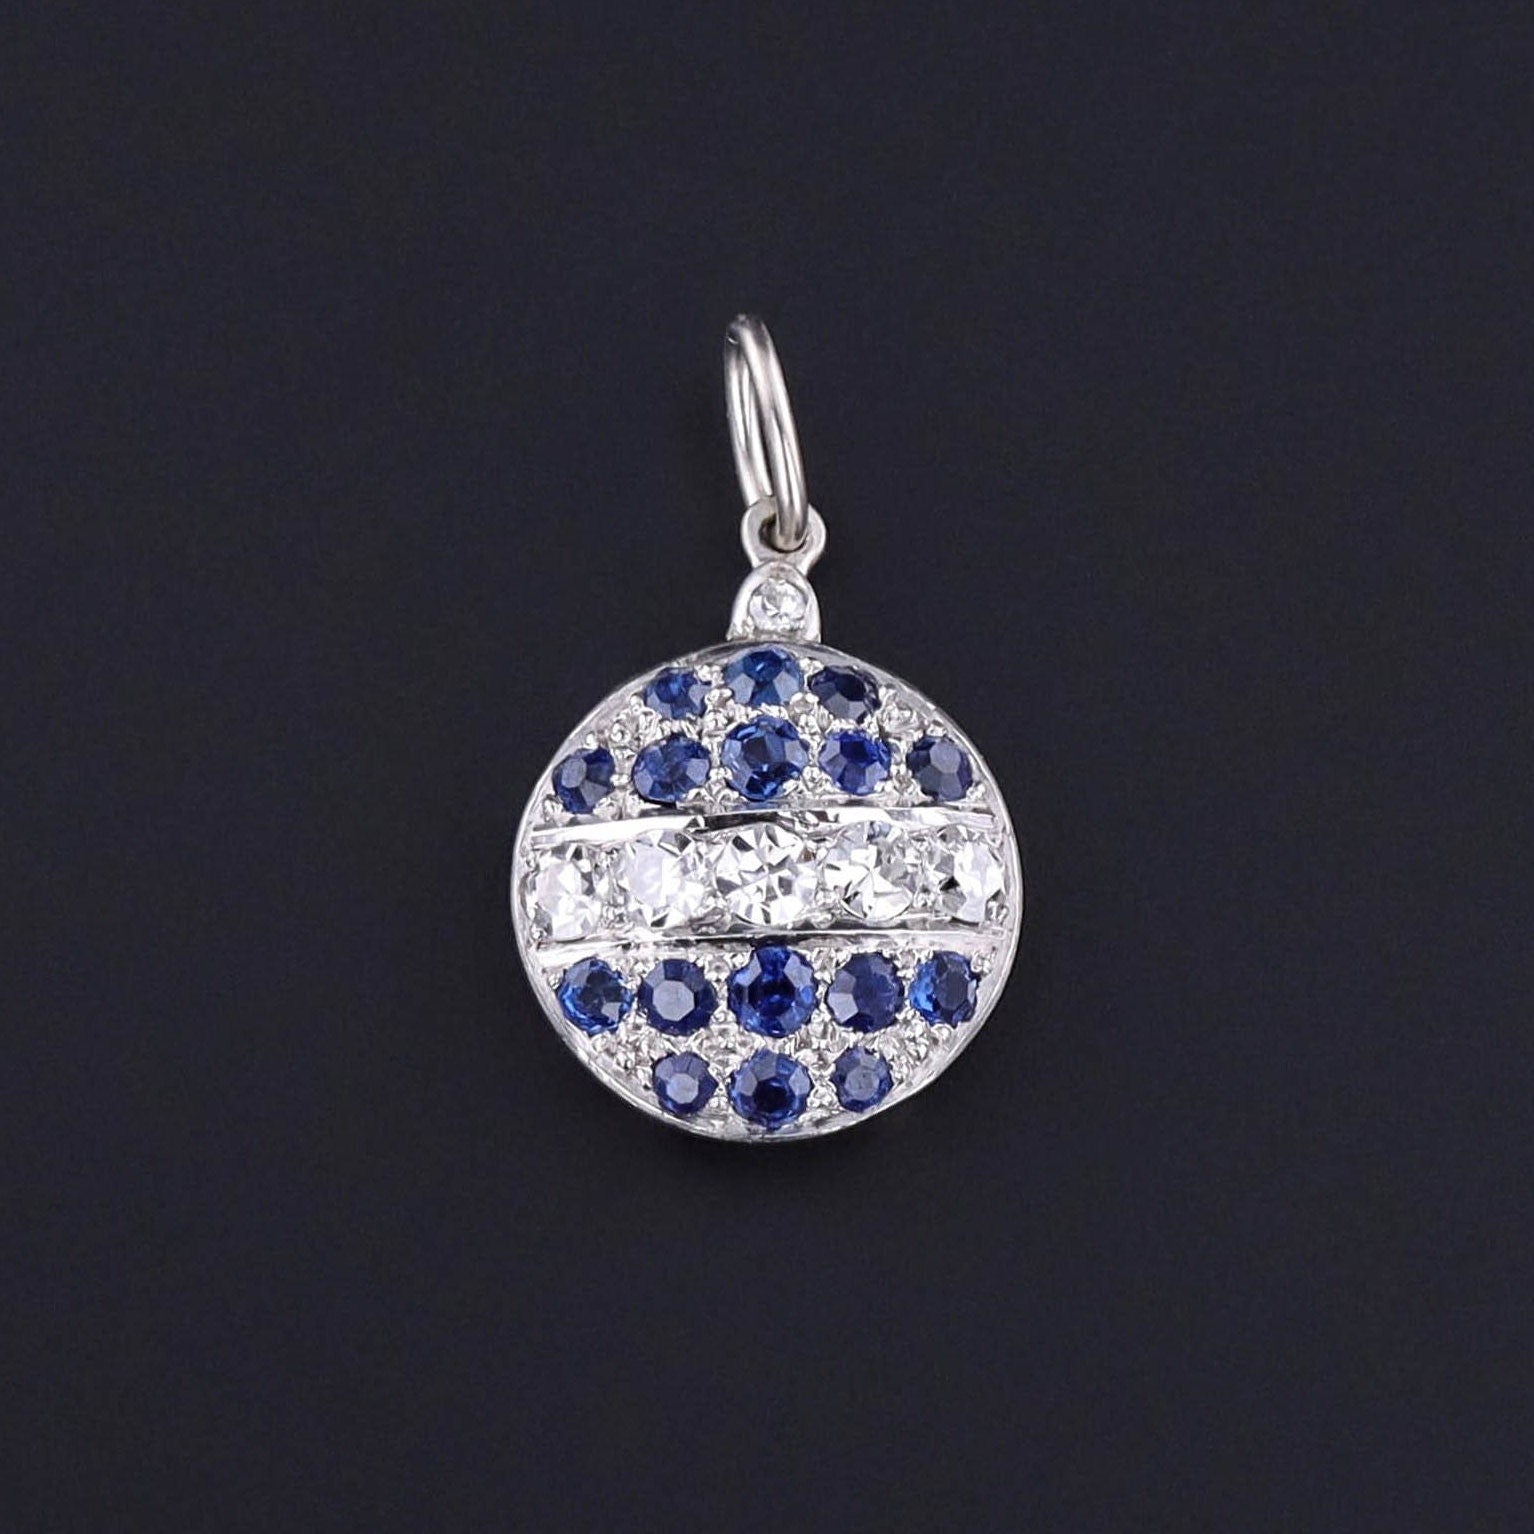 Antique Sapphire and Diamond Conversion Charm of 18k White Gold